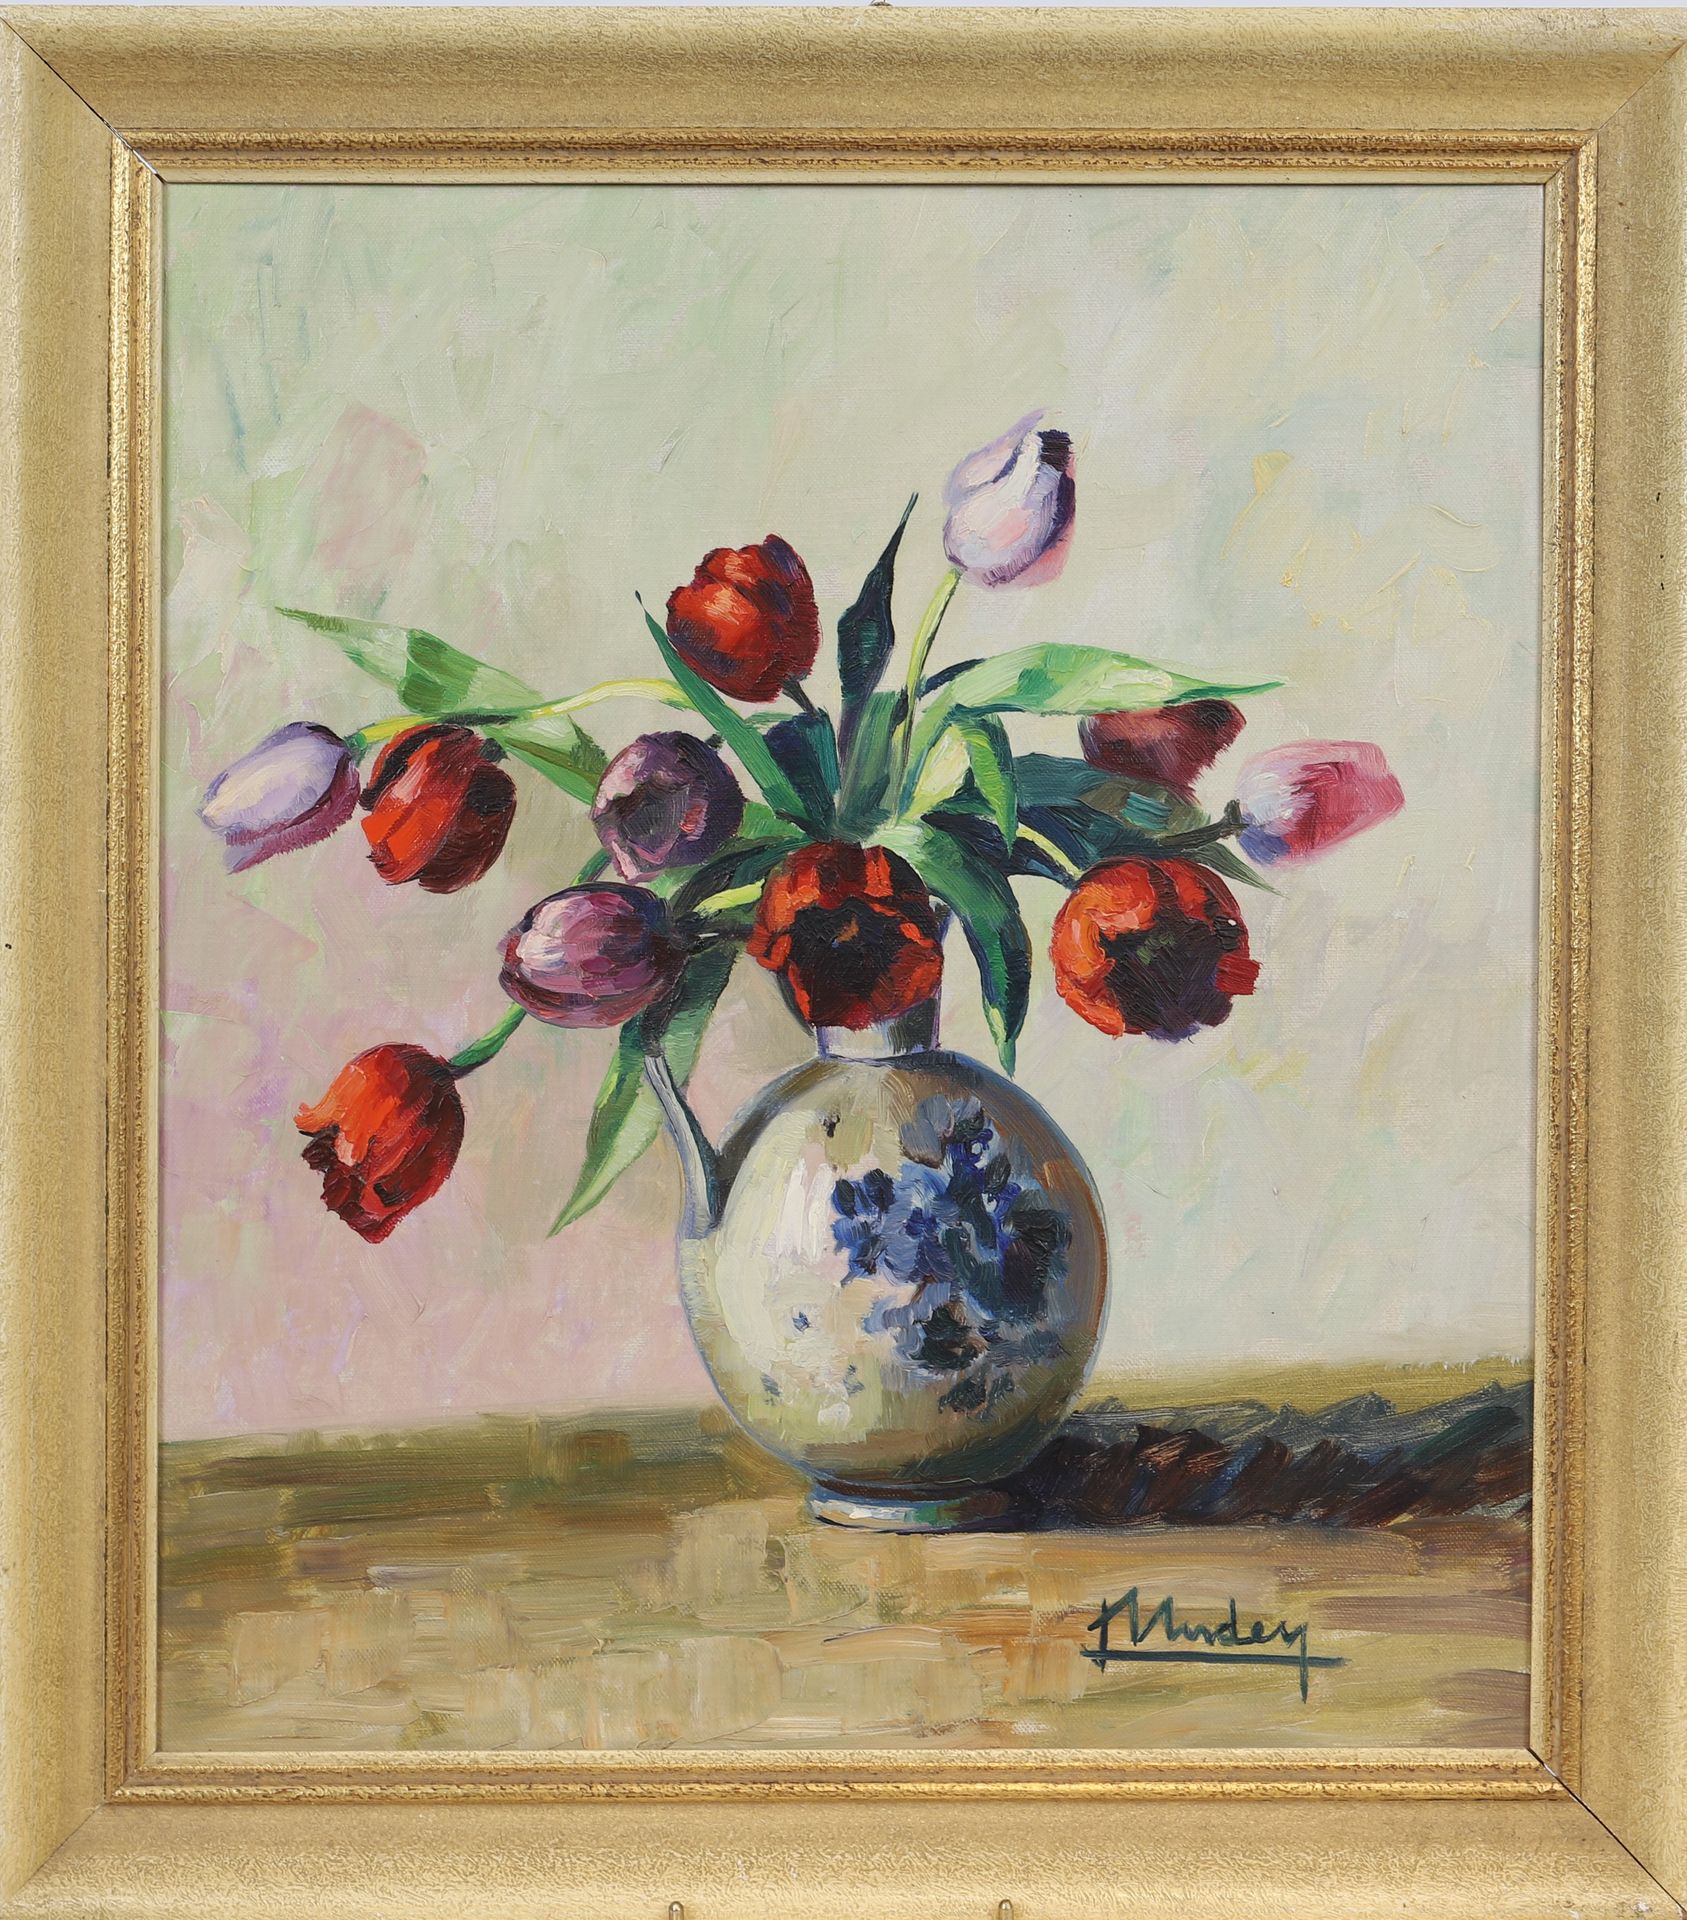 Null Lily Unden (1908-1989)

Painter from Luxembourg

Oil on isorel, bouquet of &hellip;